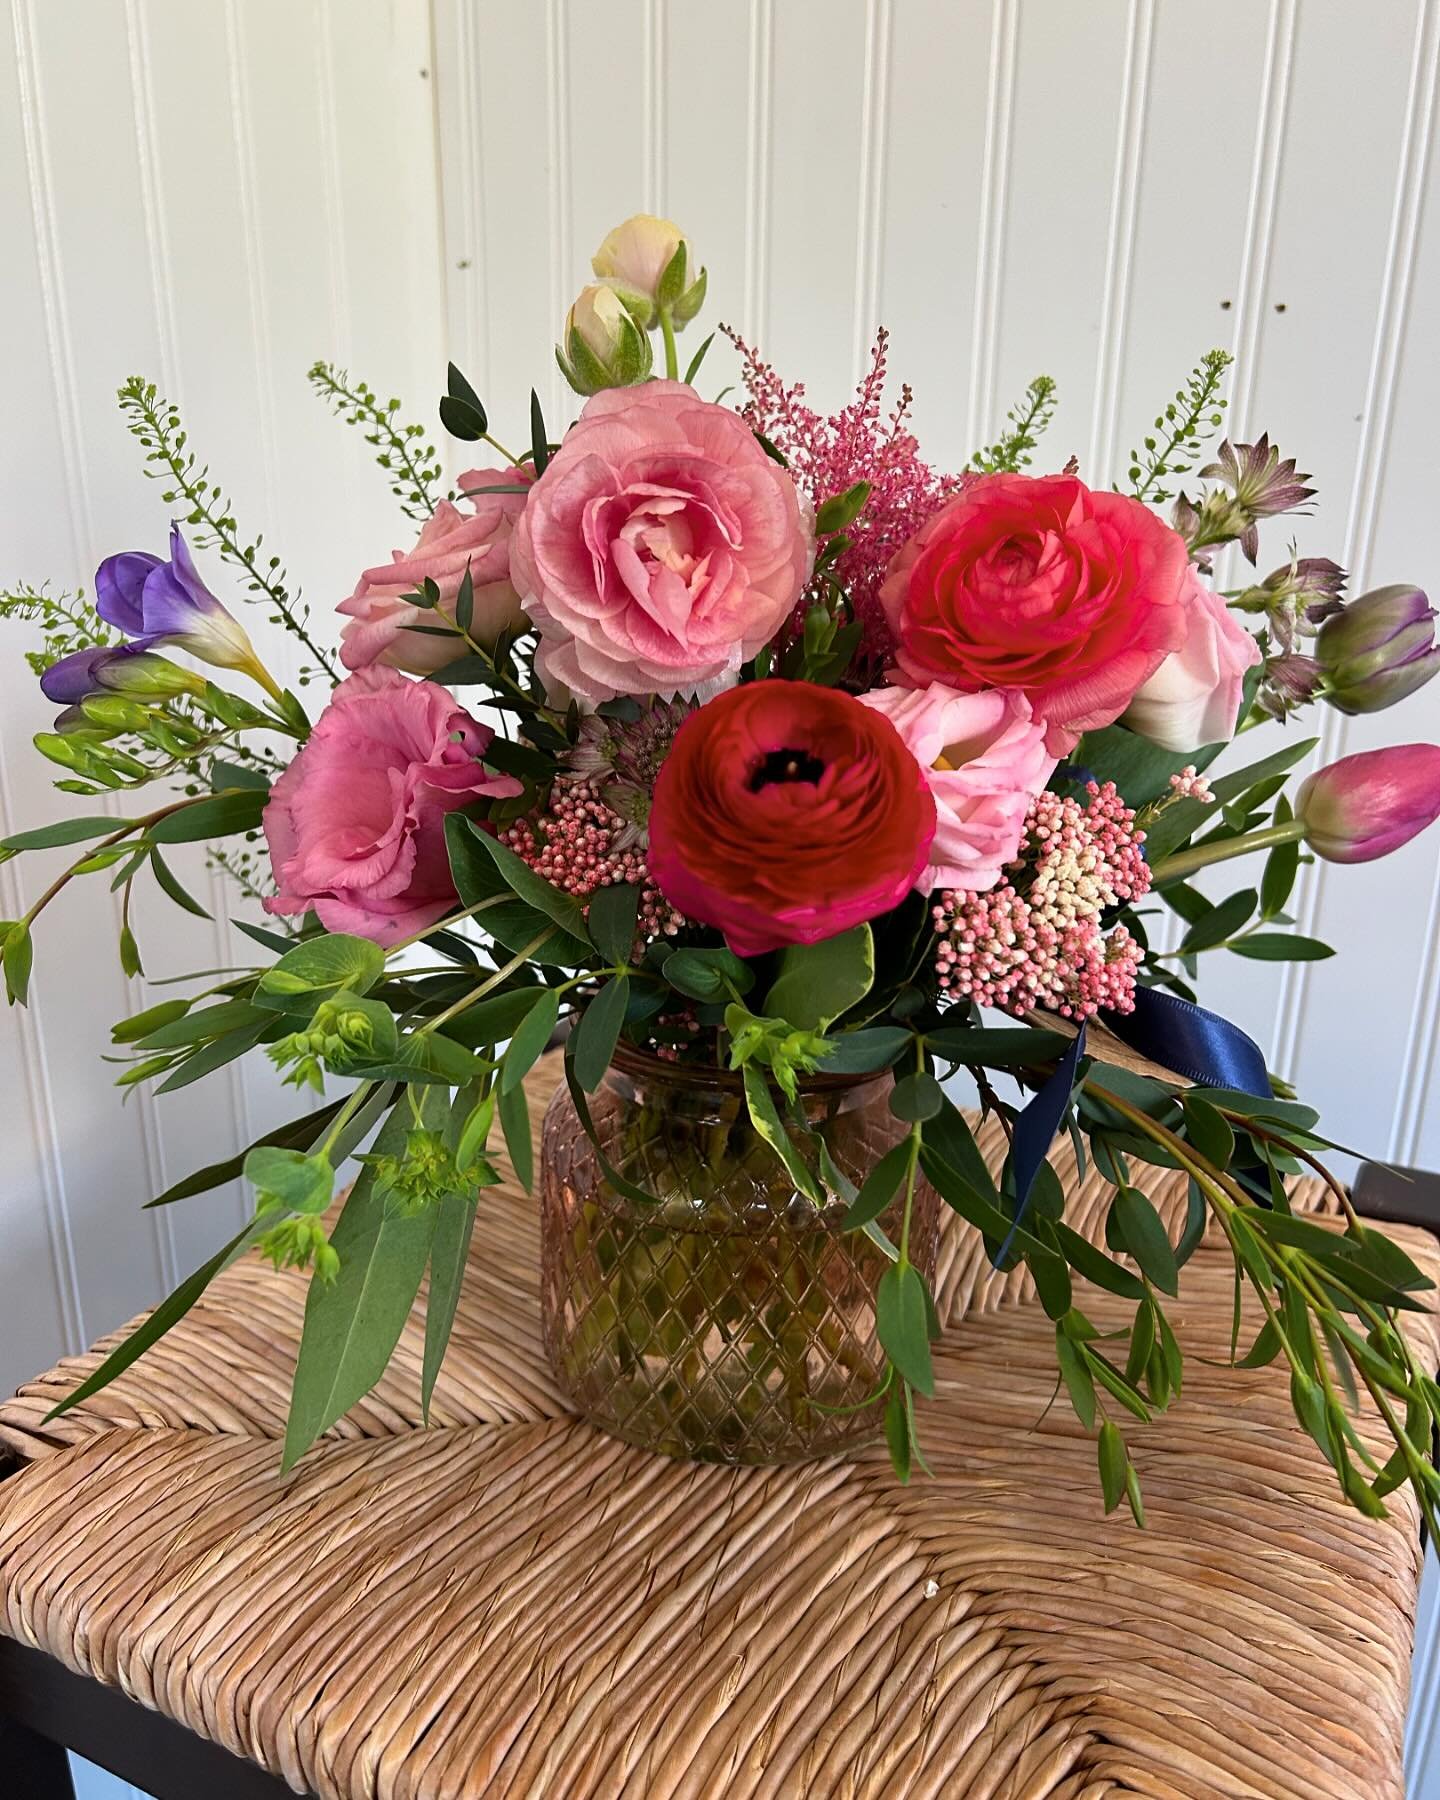 Order today for Mother&rsquo;s Day!

For those who deserve to know how much they mean to you, a Mother&rsquo;s Day floral arrangement is just the thing! We will be offering multiple sizes and styles of floral arrangements for Mother&rsquo;s Day. &nbs